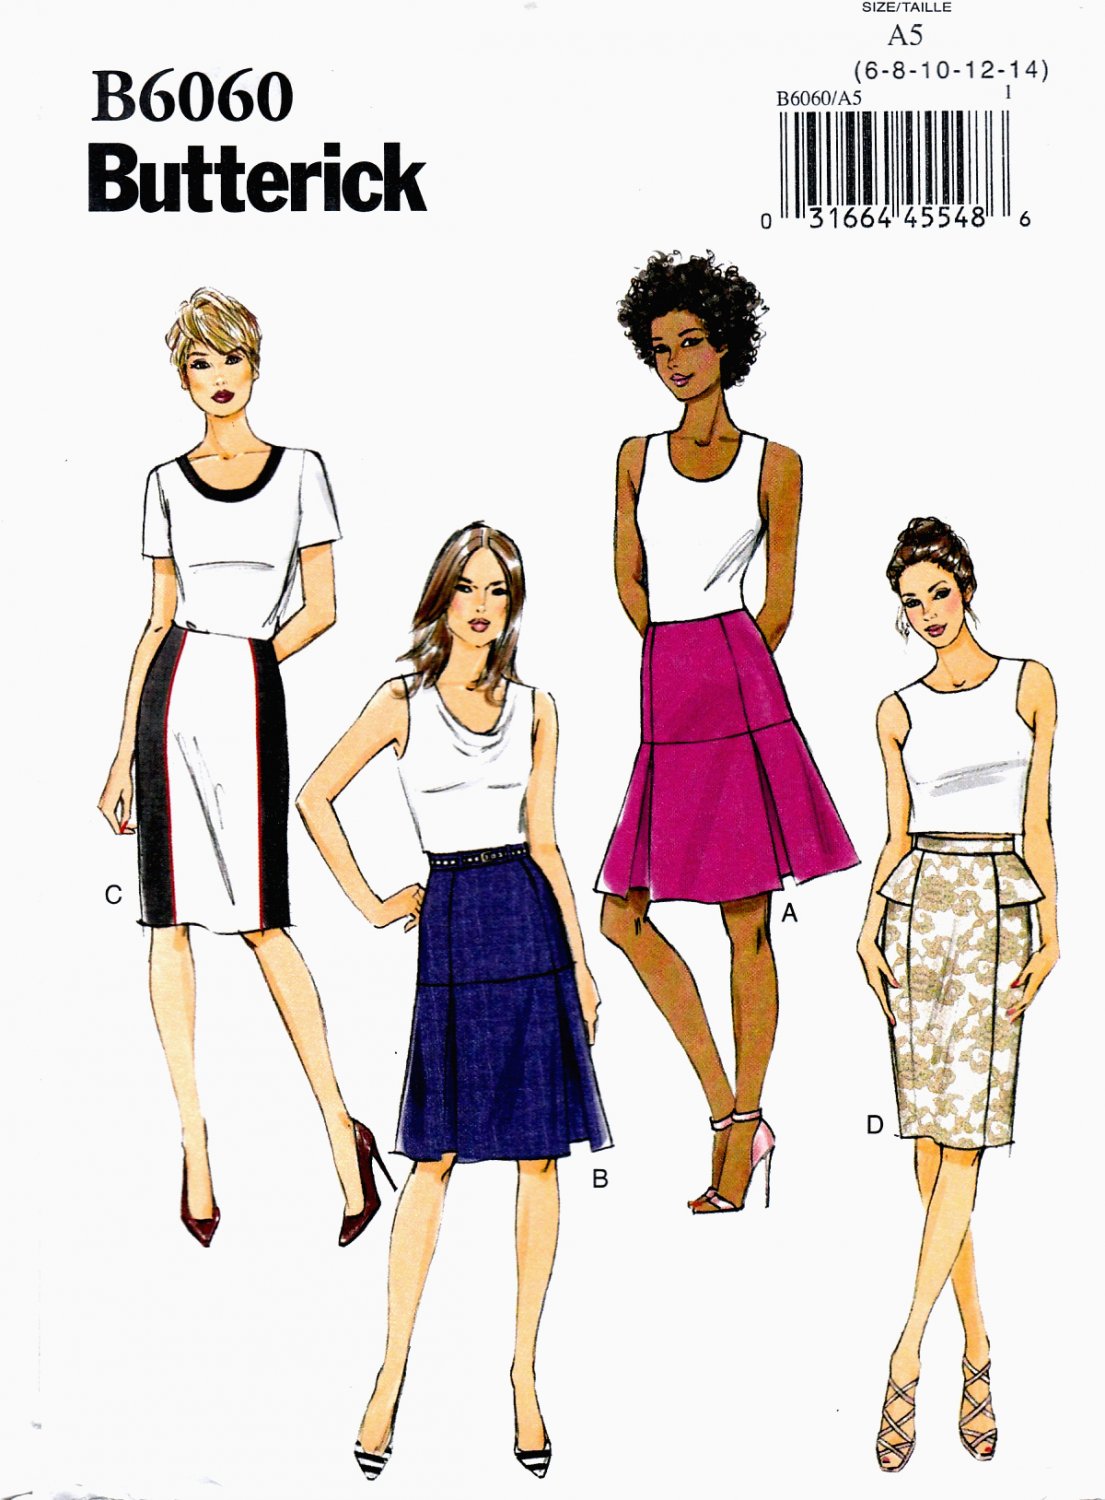 Butterick B6060 Misses Skirts Lined Semi Fitted Sewing Pattern Sizes 6-8-10-12-14